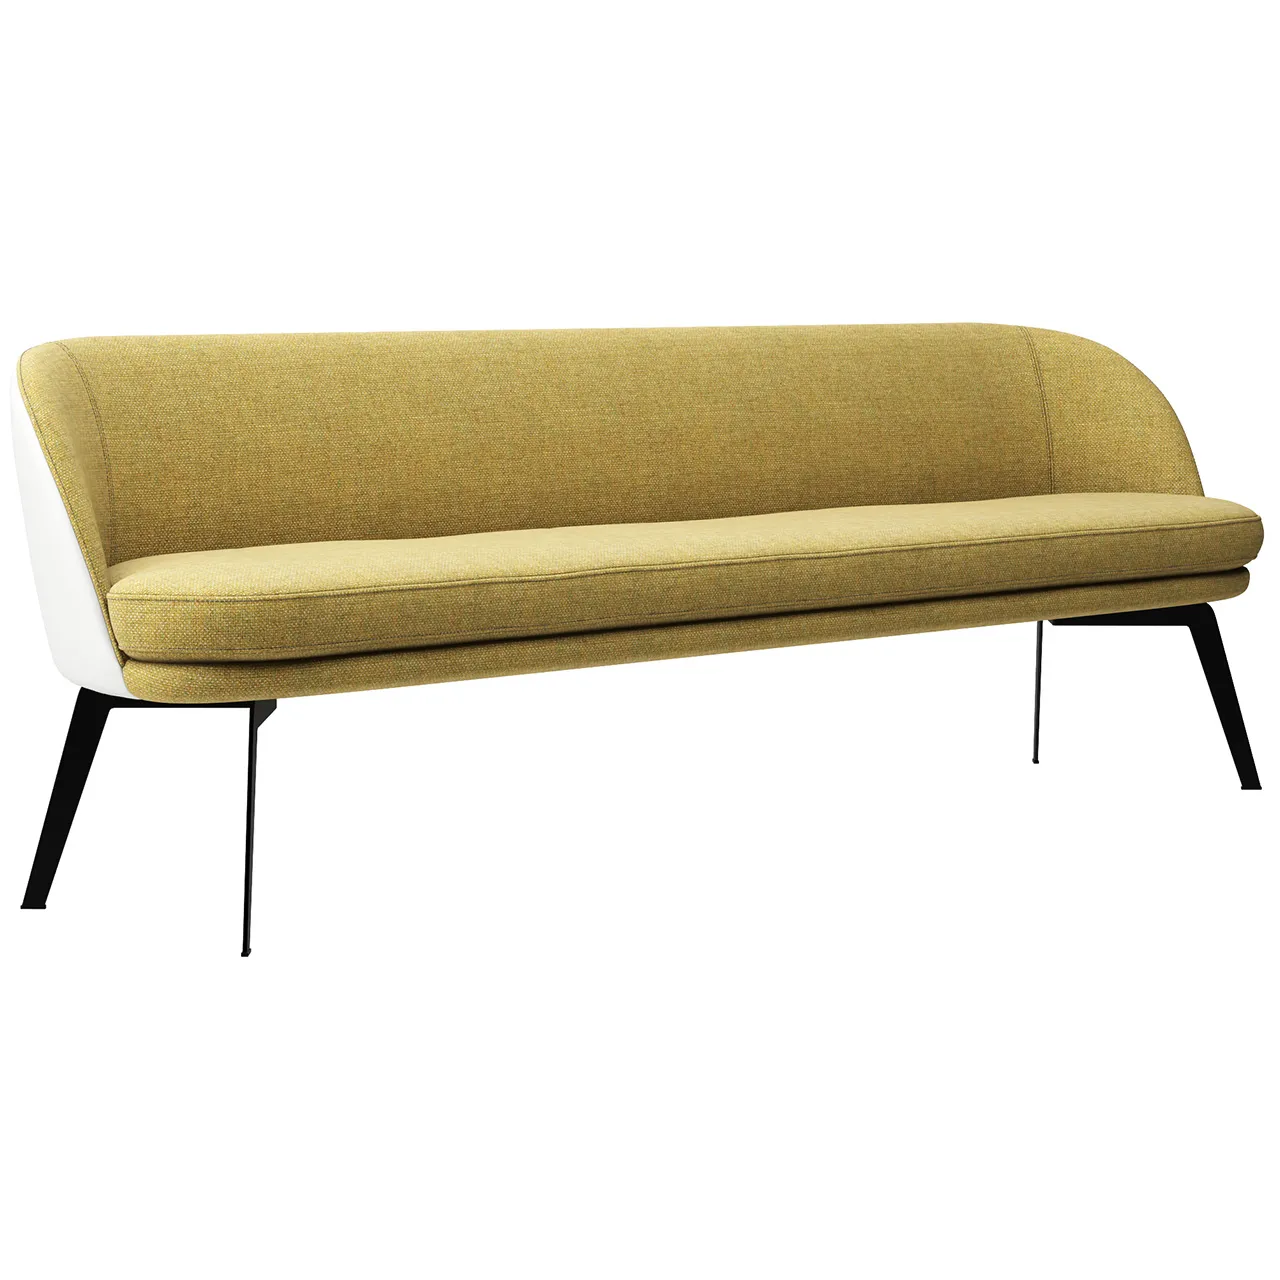 Furniture – 629-bench-by-rolf-benz